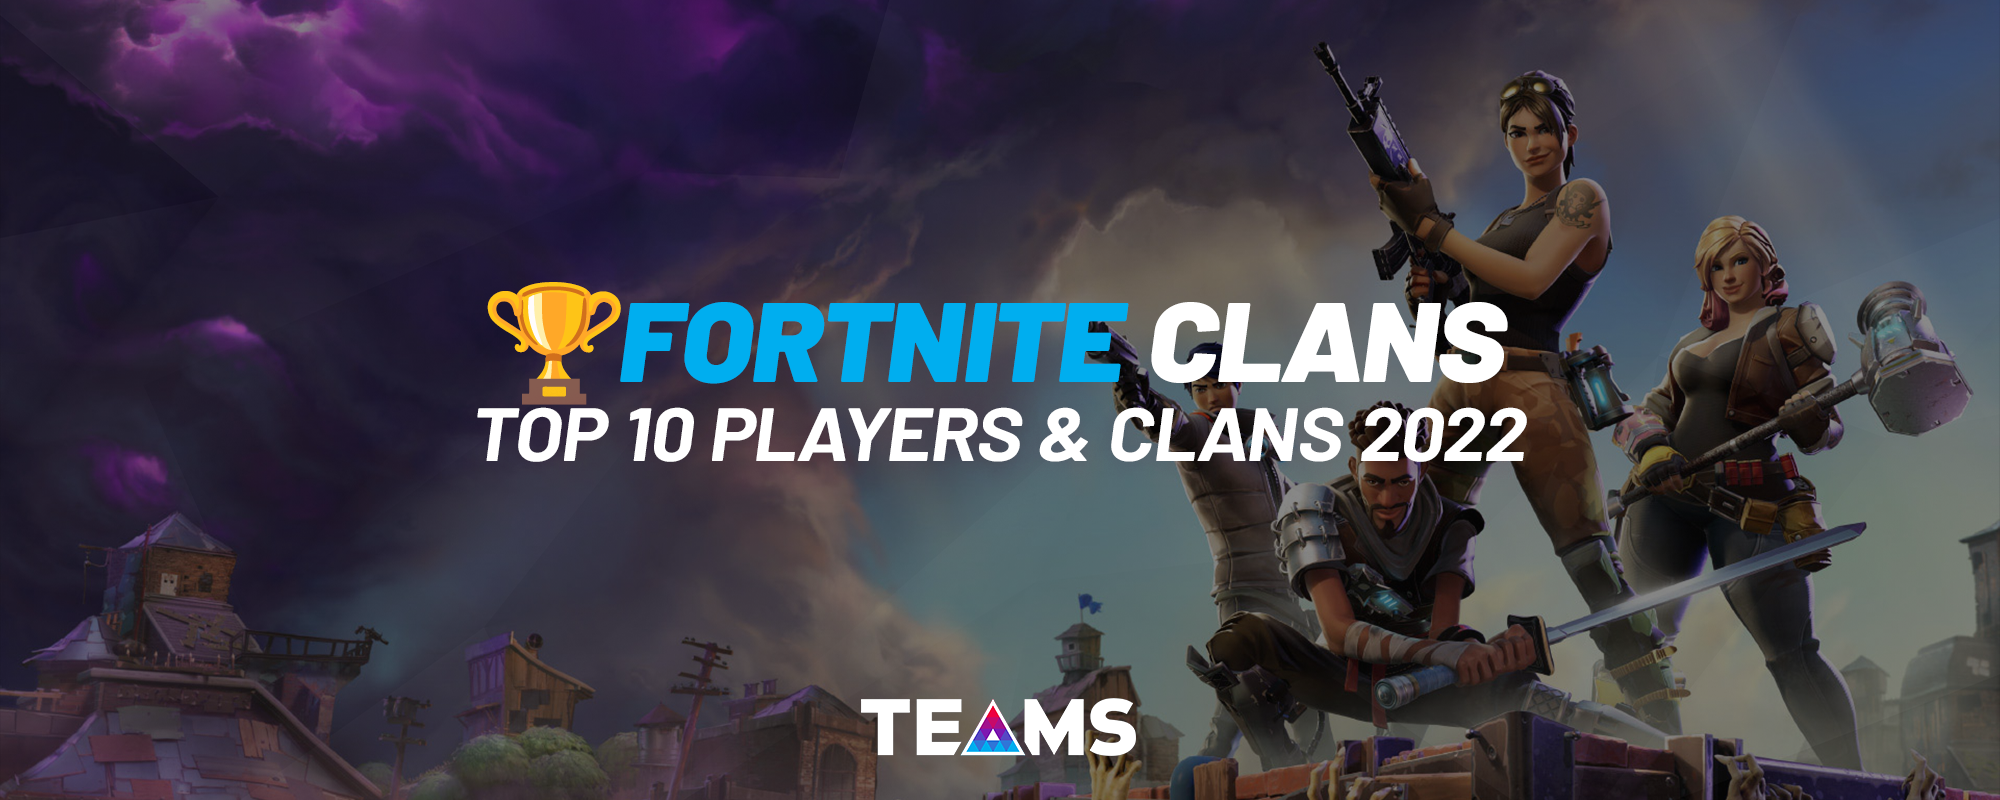 Top Fortnite Clans 2022